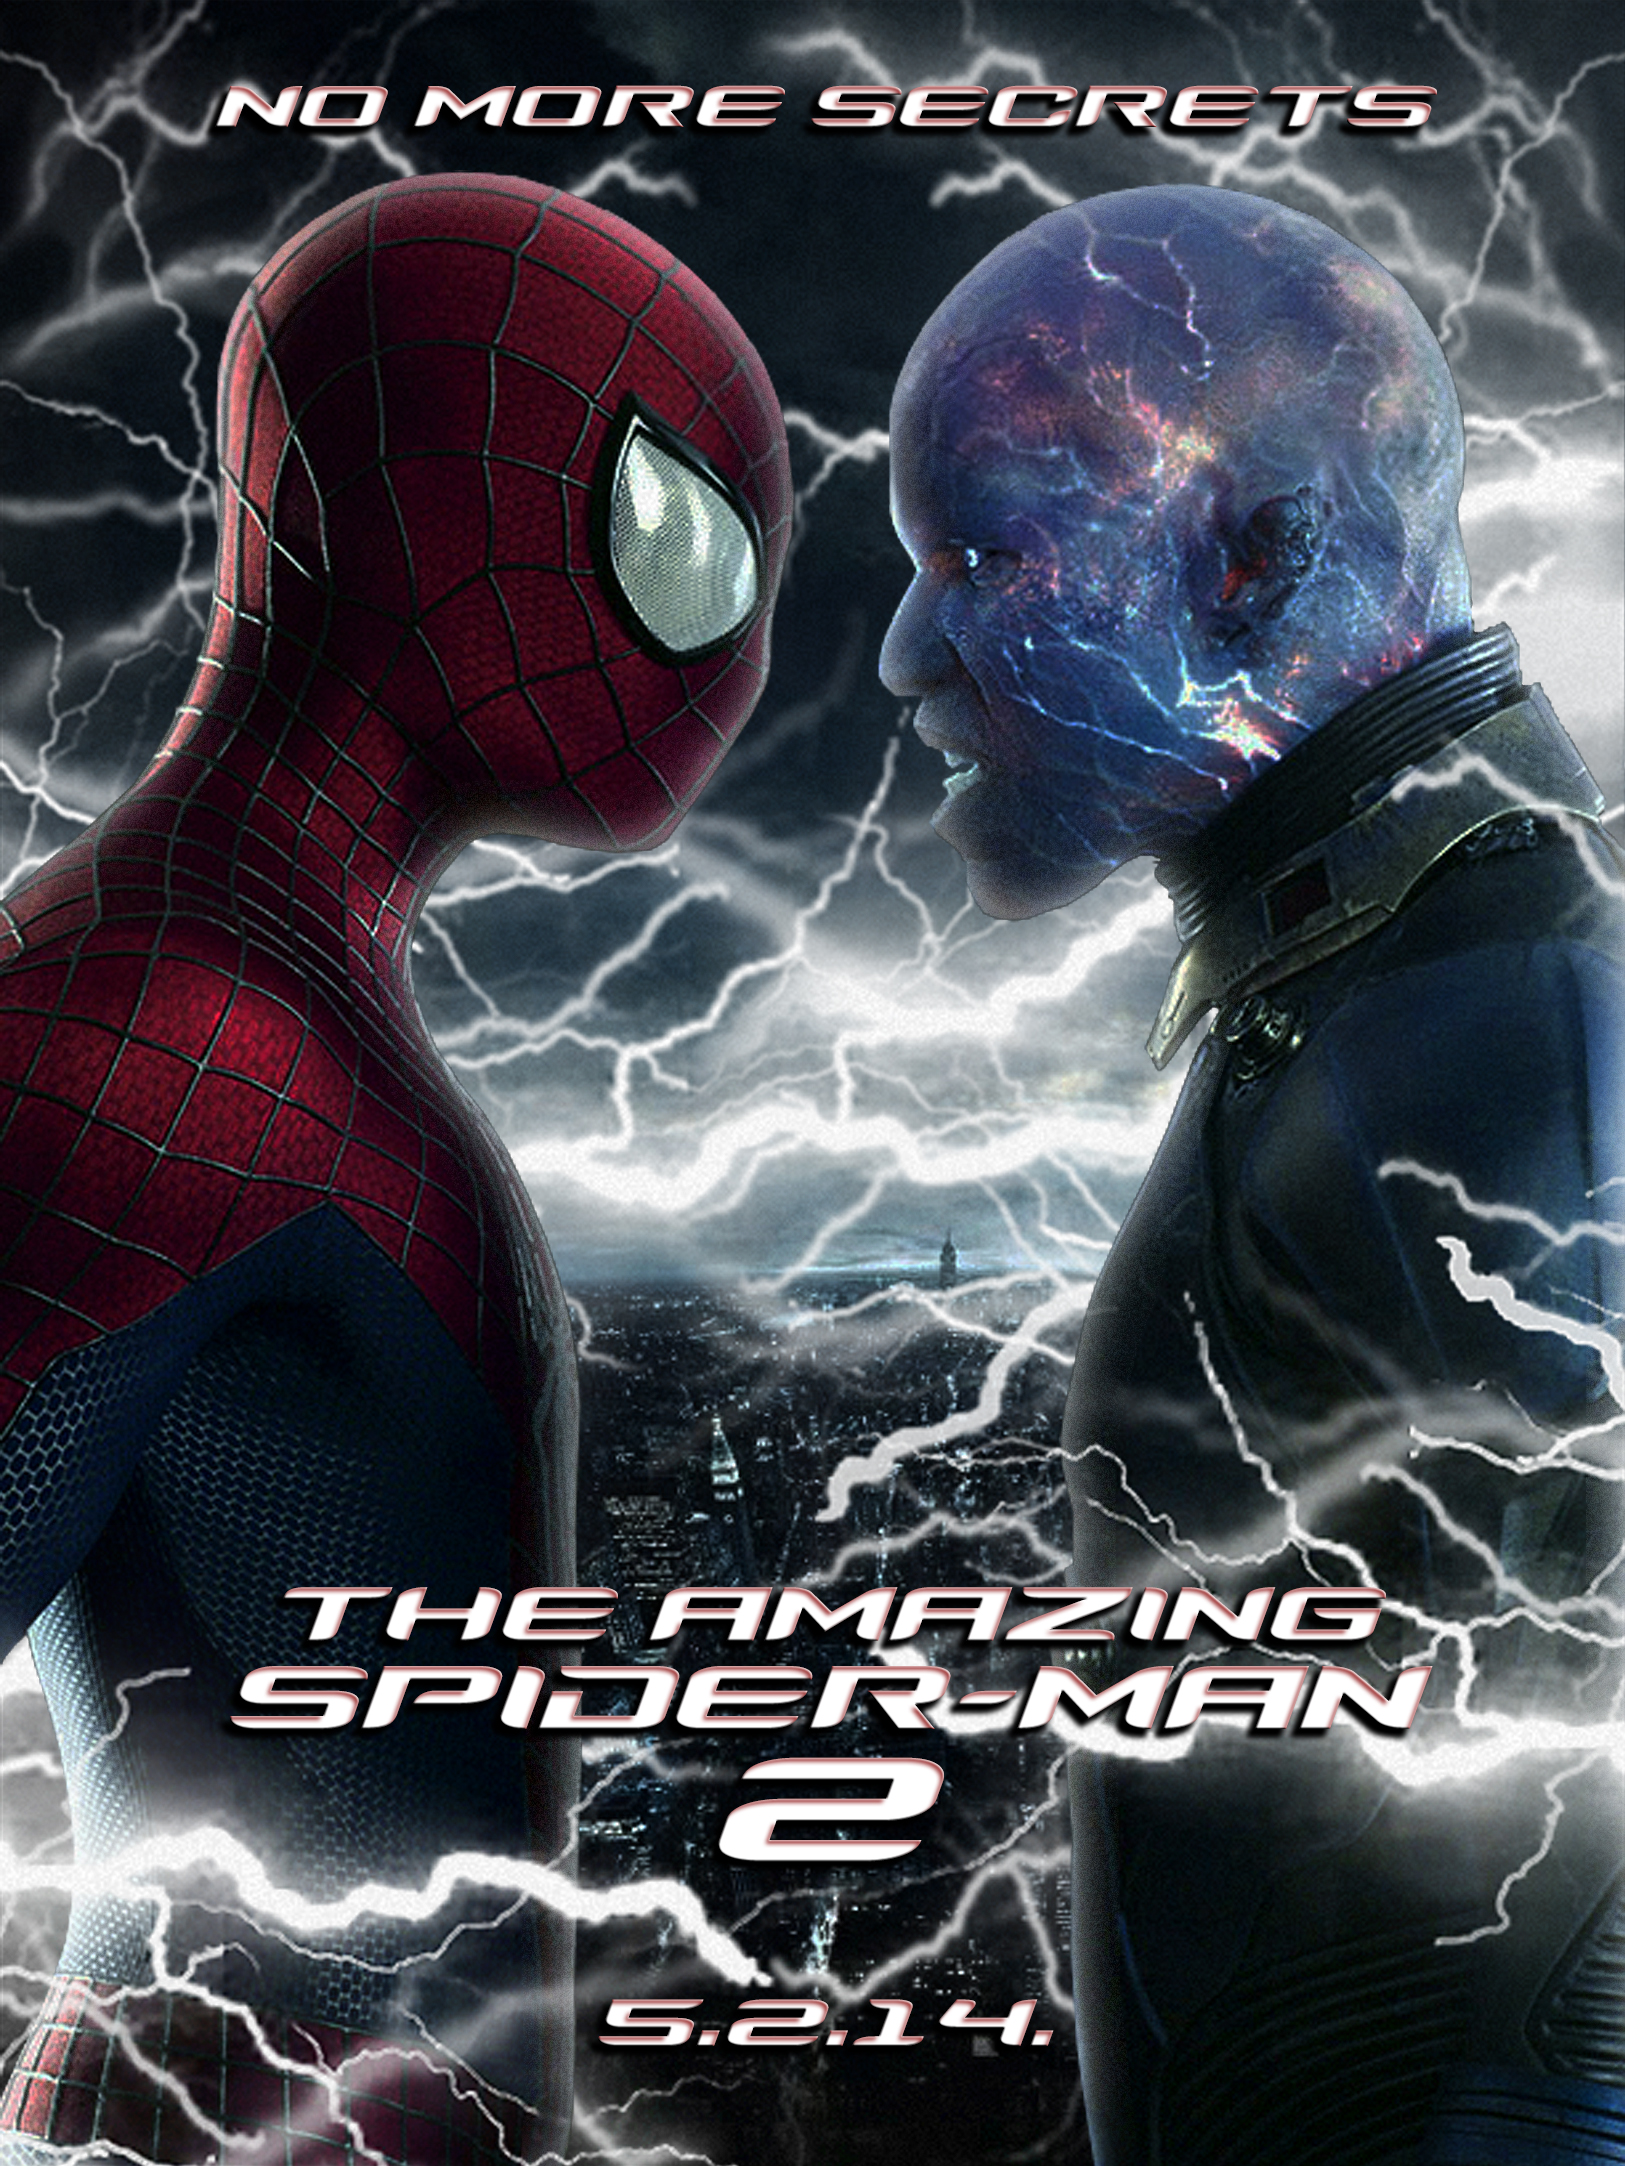 The Amazing Spider-Man 2 - Electro Poster by bijit69 on DeviantArt